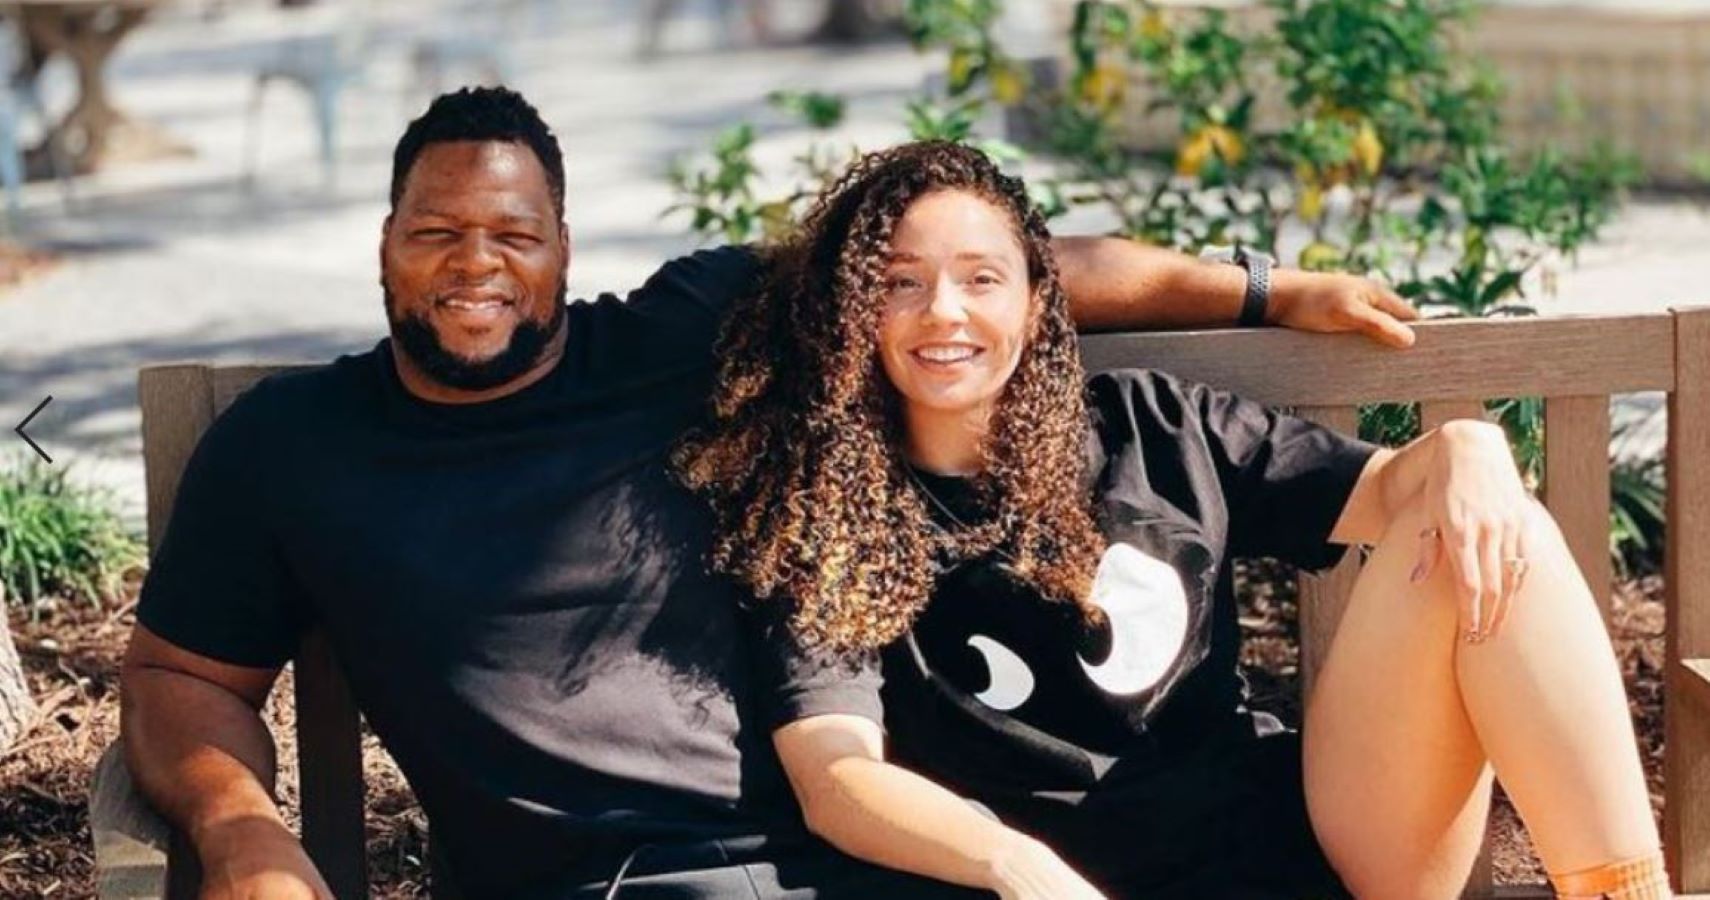 NFL's Ndamukong Suh's Wife Katya Is Pregnant With Twins